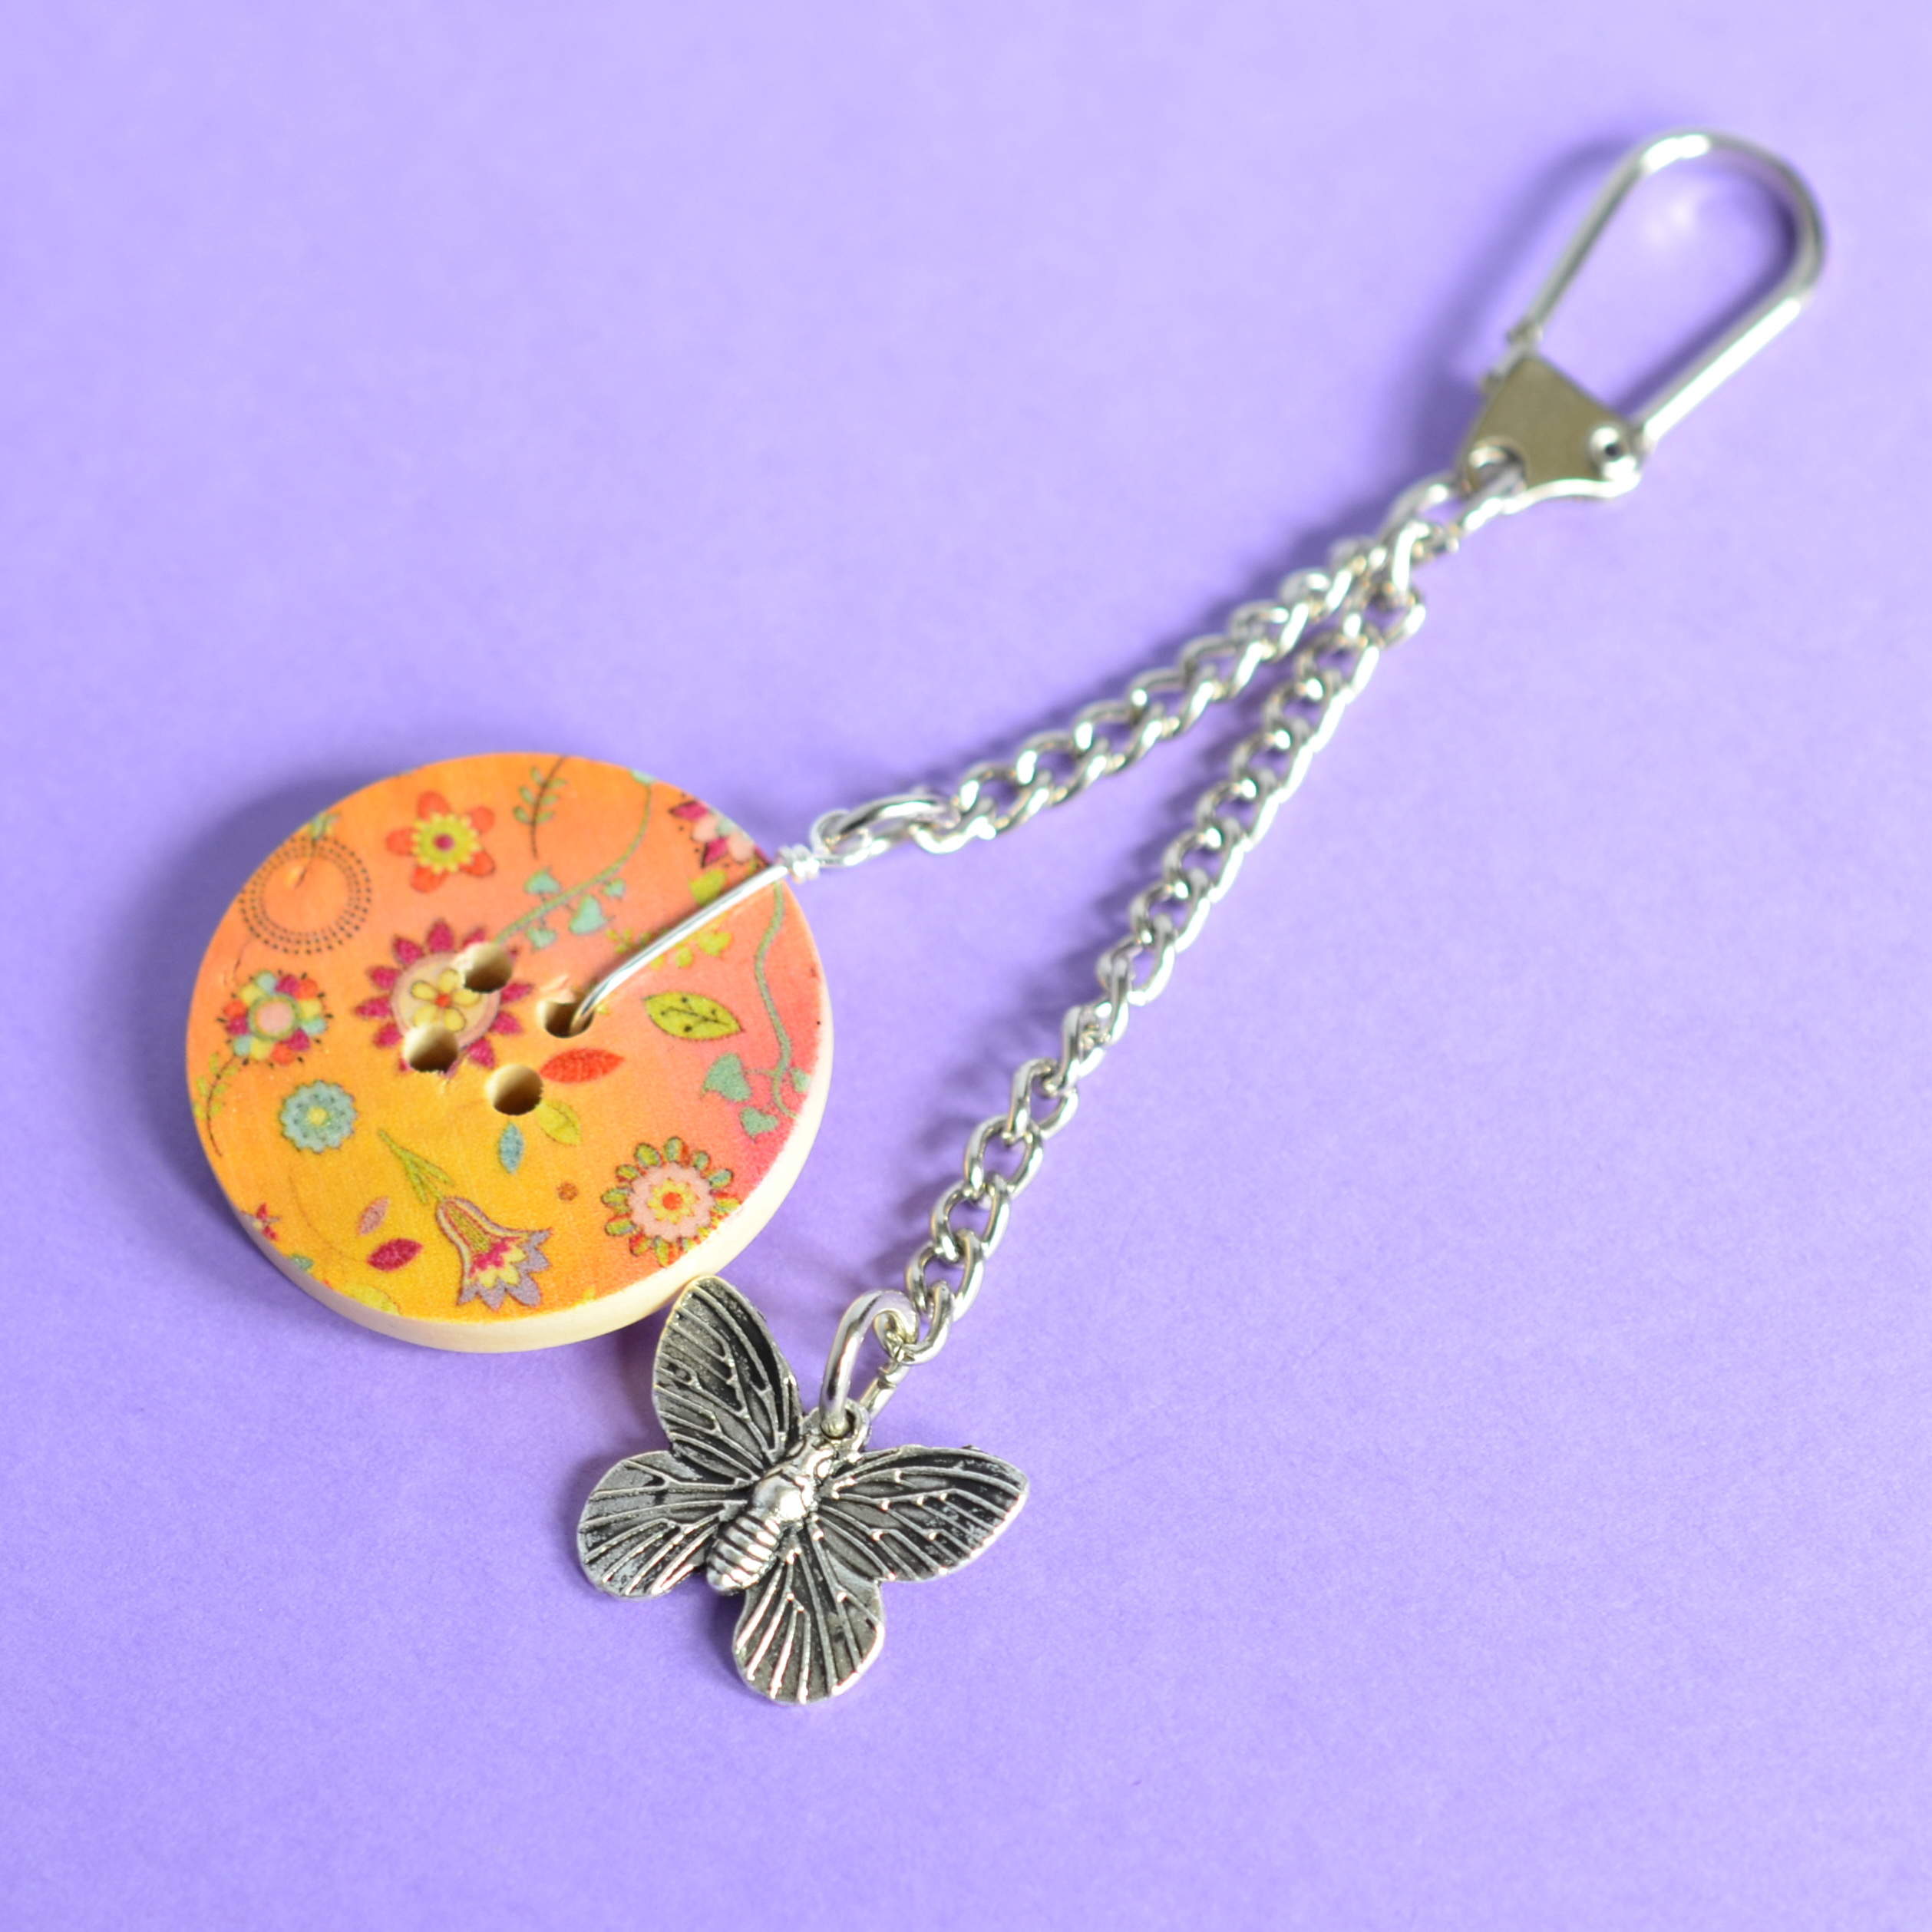 Butterfly Single Button Bag Charm Keyring